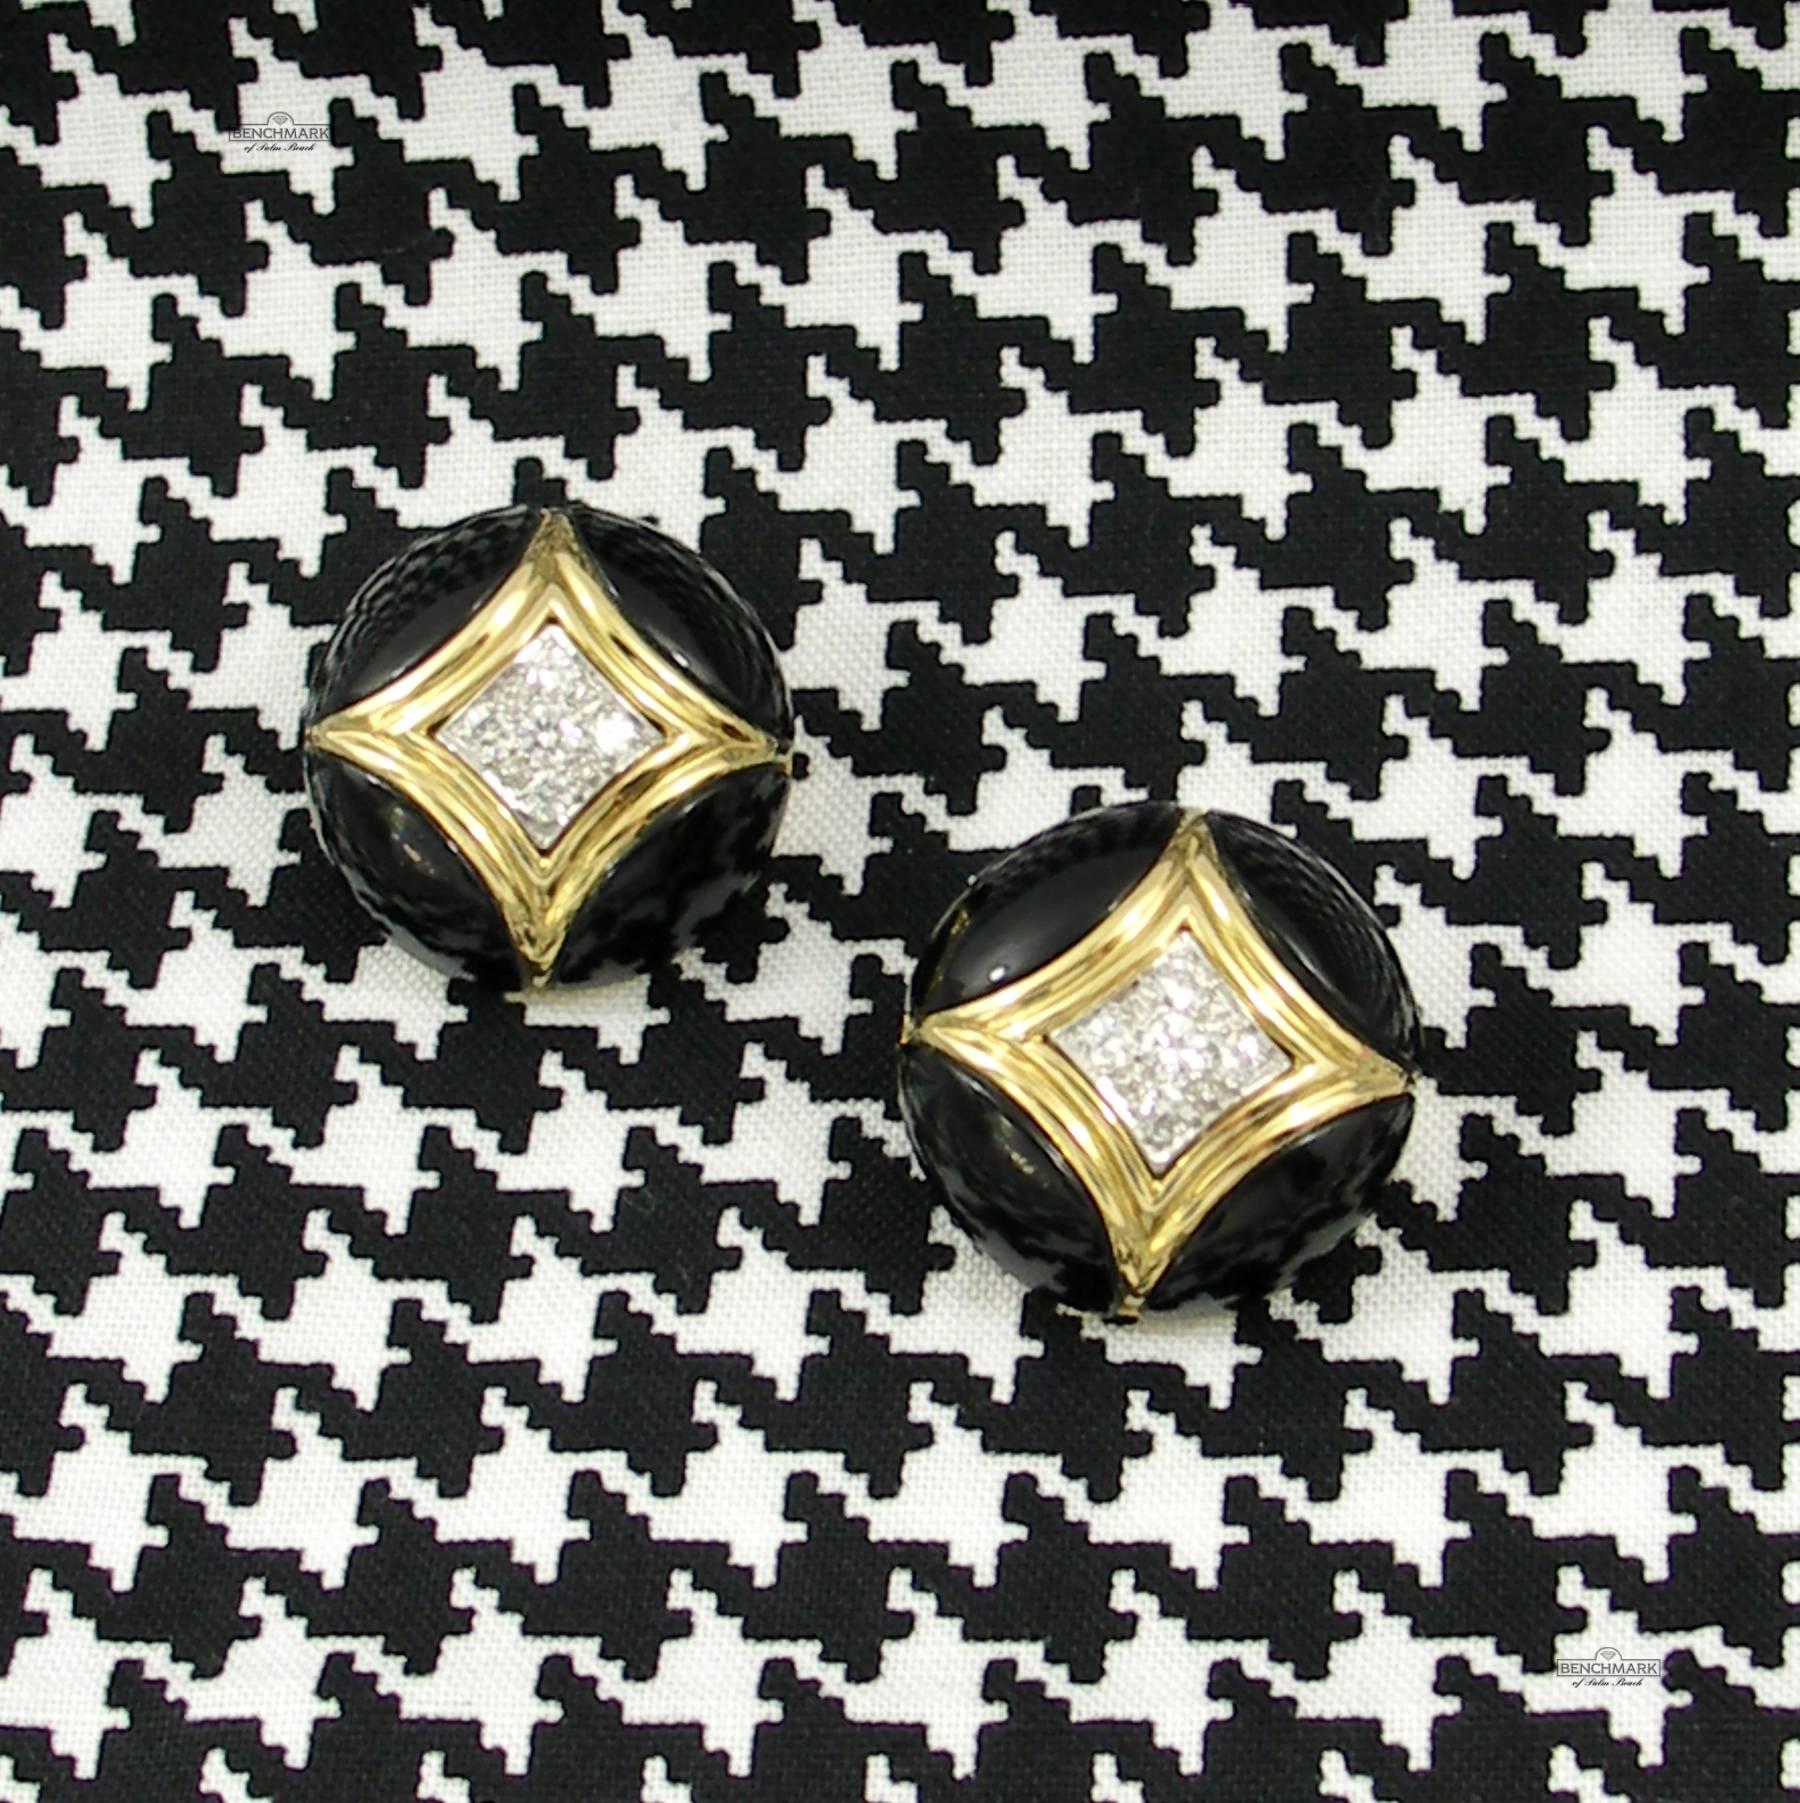 A pair of Van Cleef and Arpels onyx and diamond earrings in 18K yellow gold, centered around 5 pave' set round brilliant cut diamonds, outlined by a starburst design of gold, and embellished with onyx. Diamonds weigh a total of approximately 0.66ct